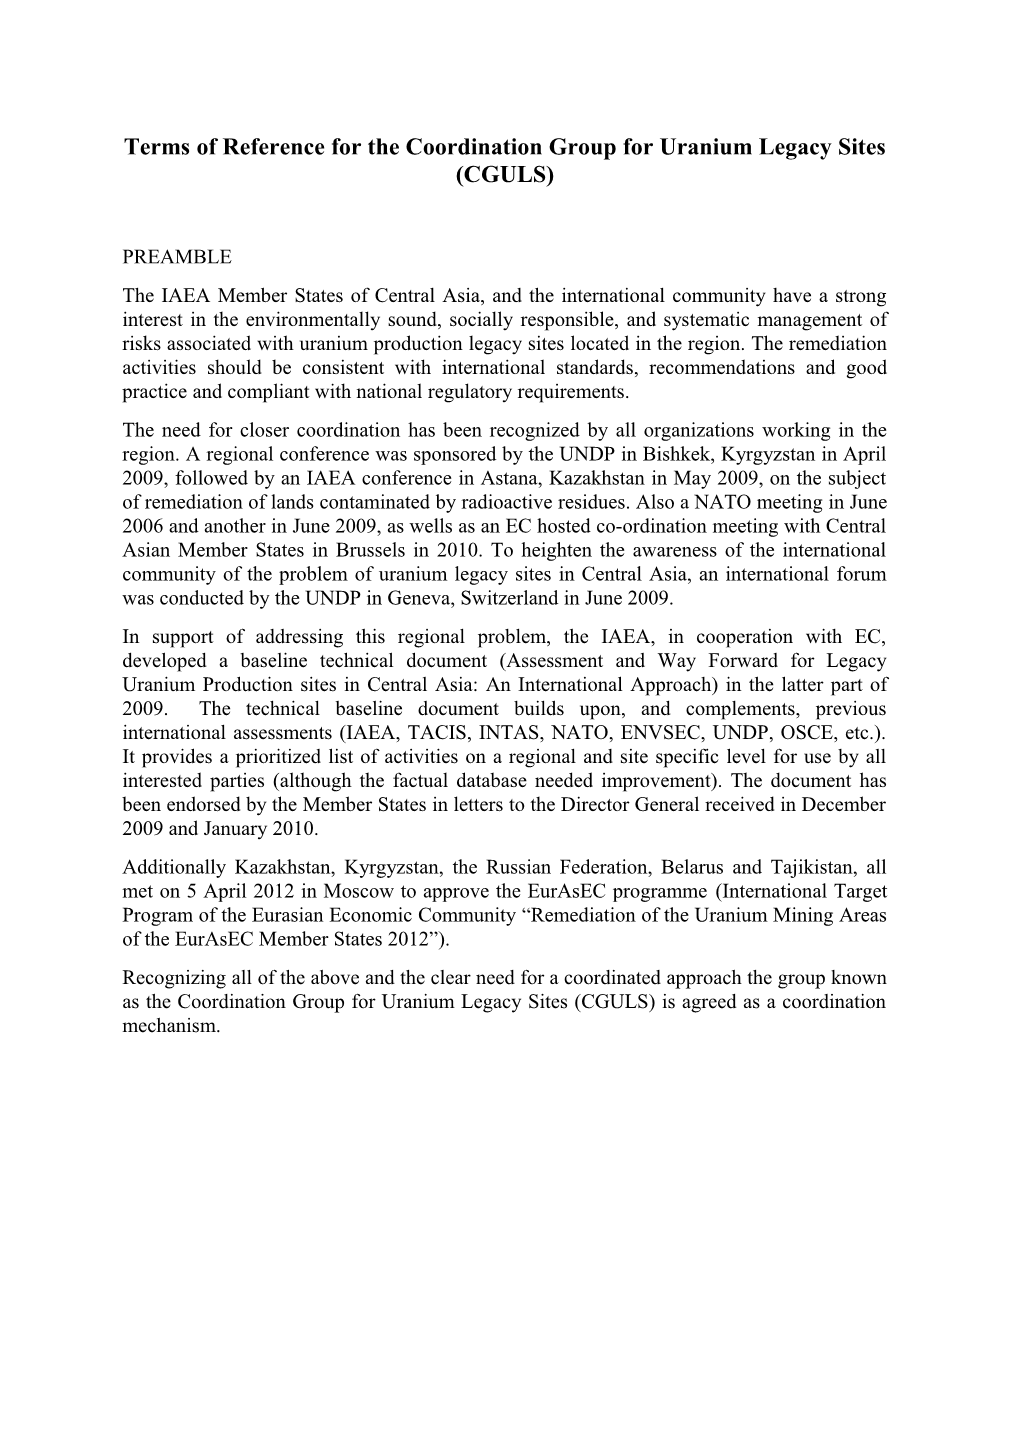 Terms of Reference for the Central Asian Coordination Group for Uranium Production Legacy